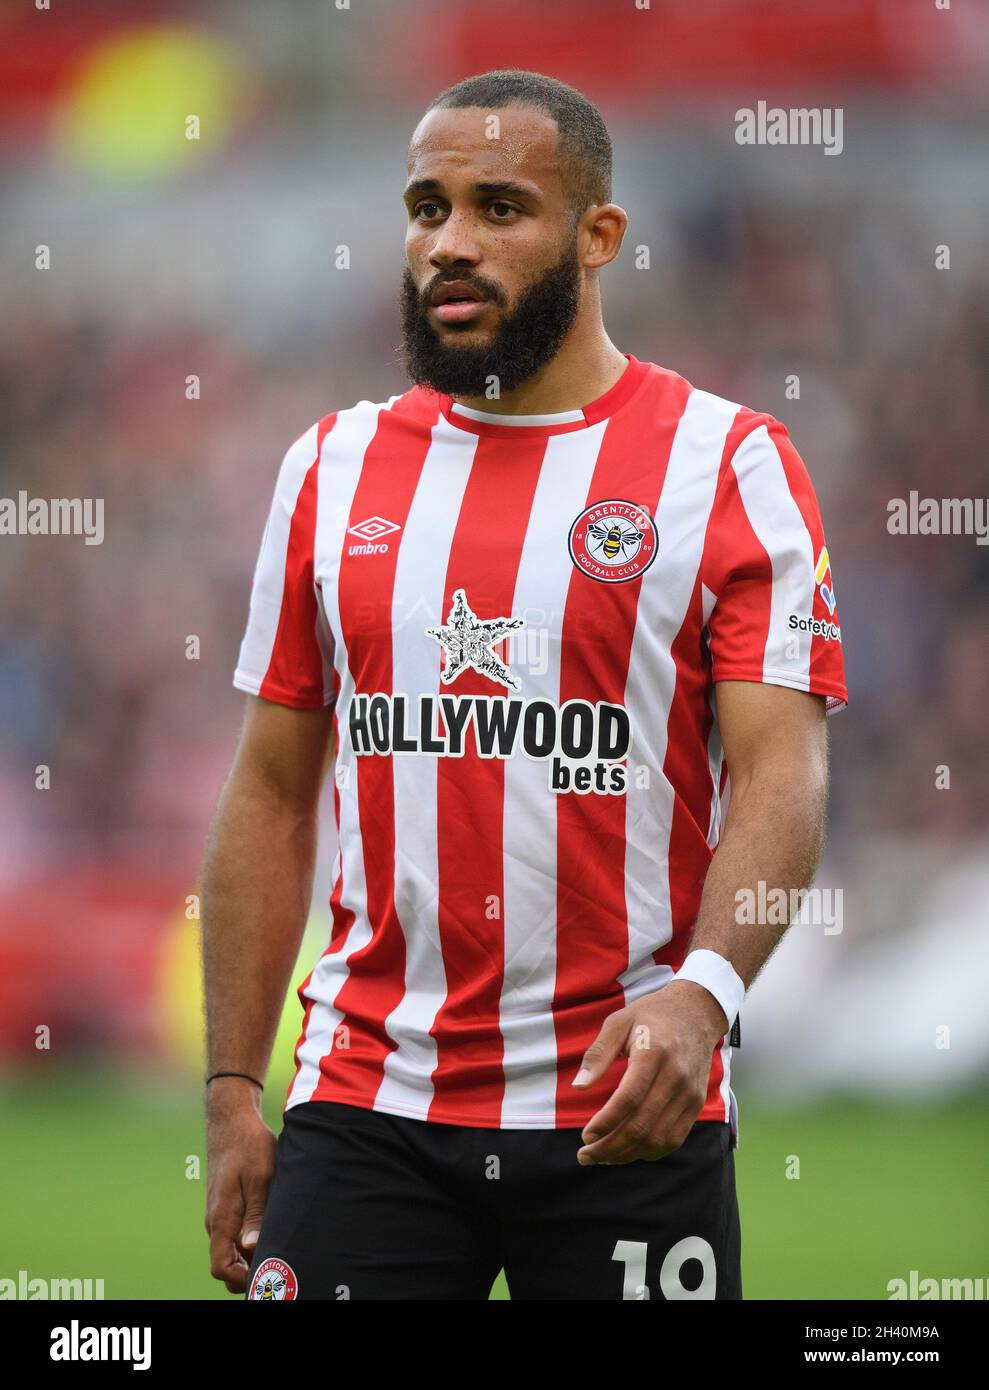 Brentford's Bryan Mbeumo during the match at the Brentford Community Stadium. Picture : Mark Pain / Alamy Stock Photo